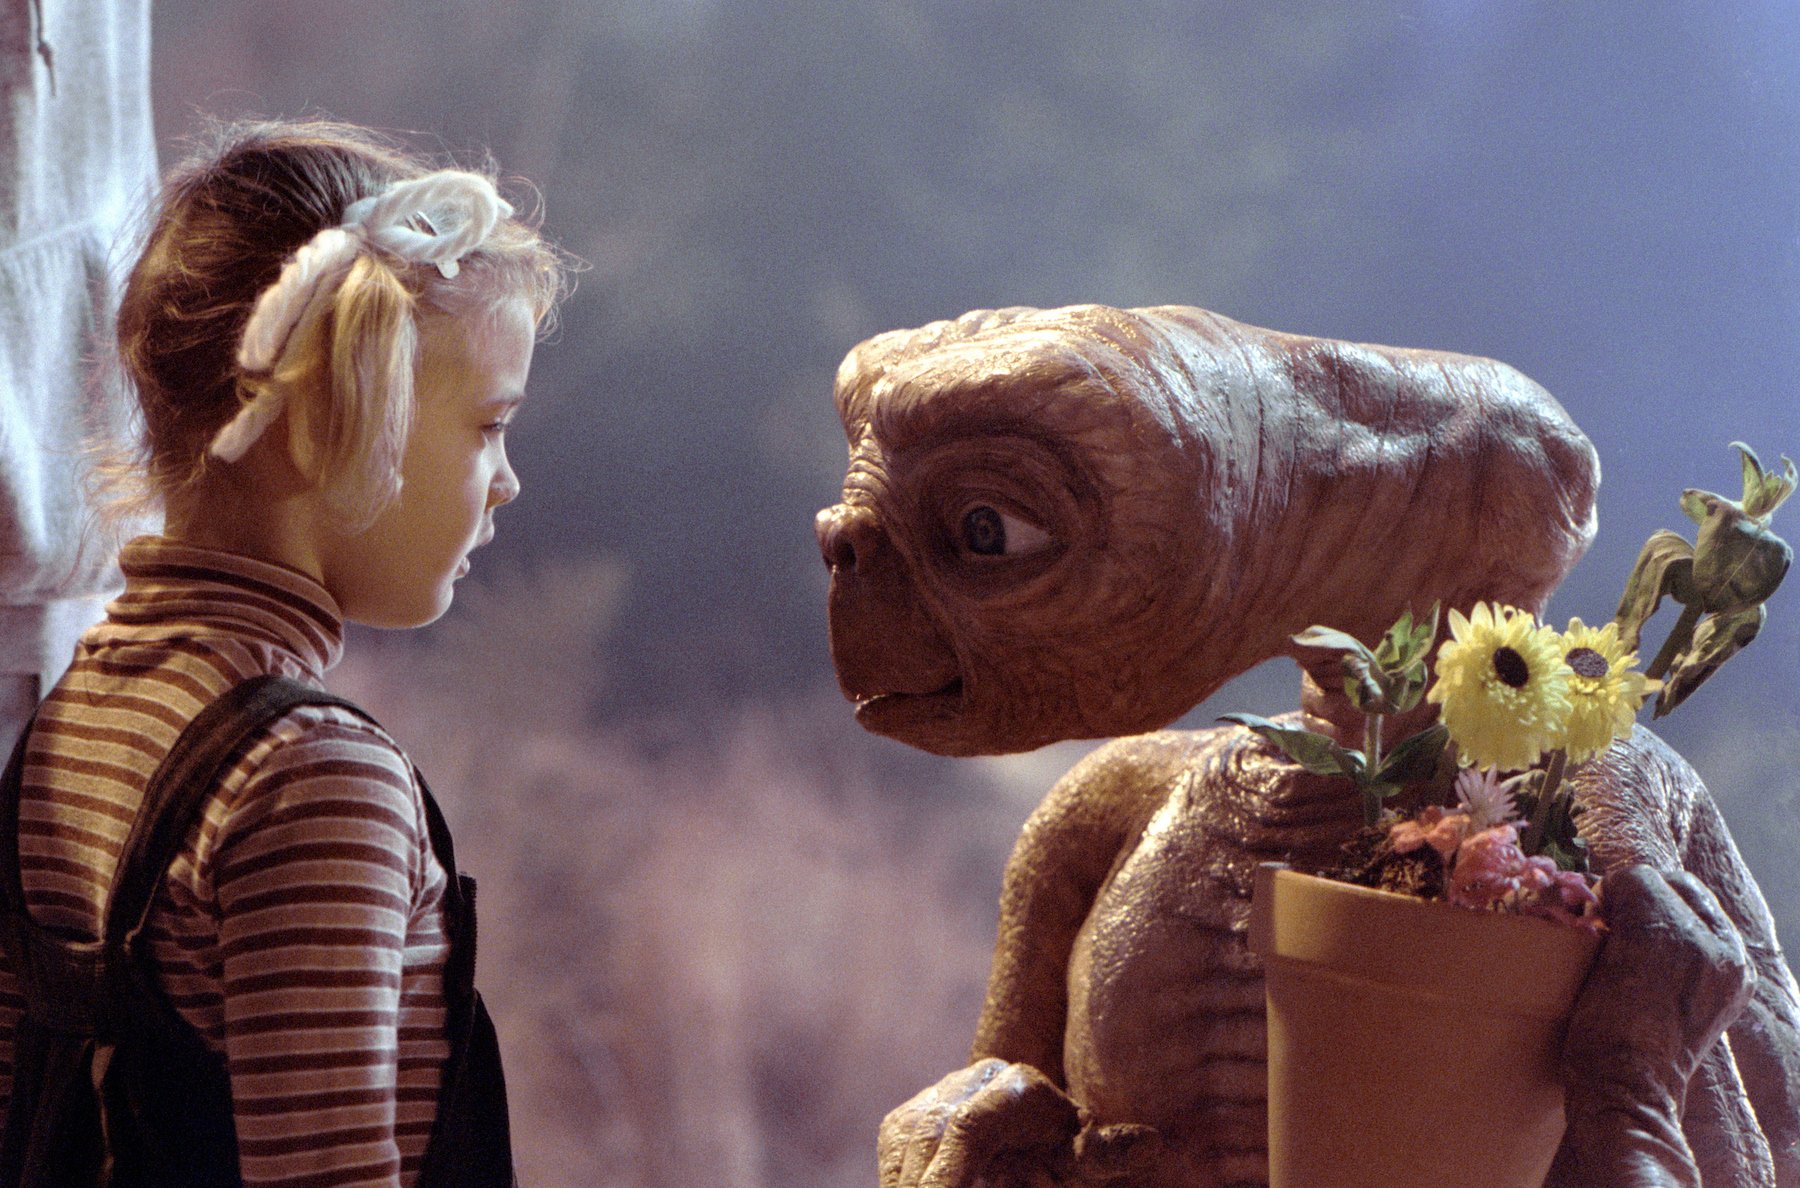 Drew Barrymore and E.T. from 'E.T. the Extra-Terrestrial'